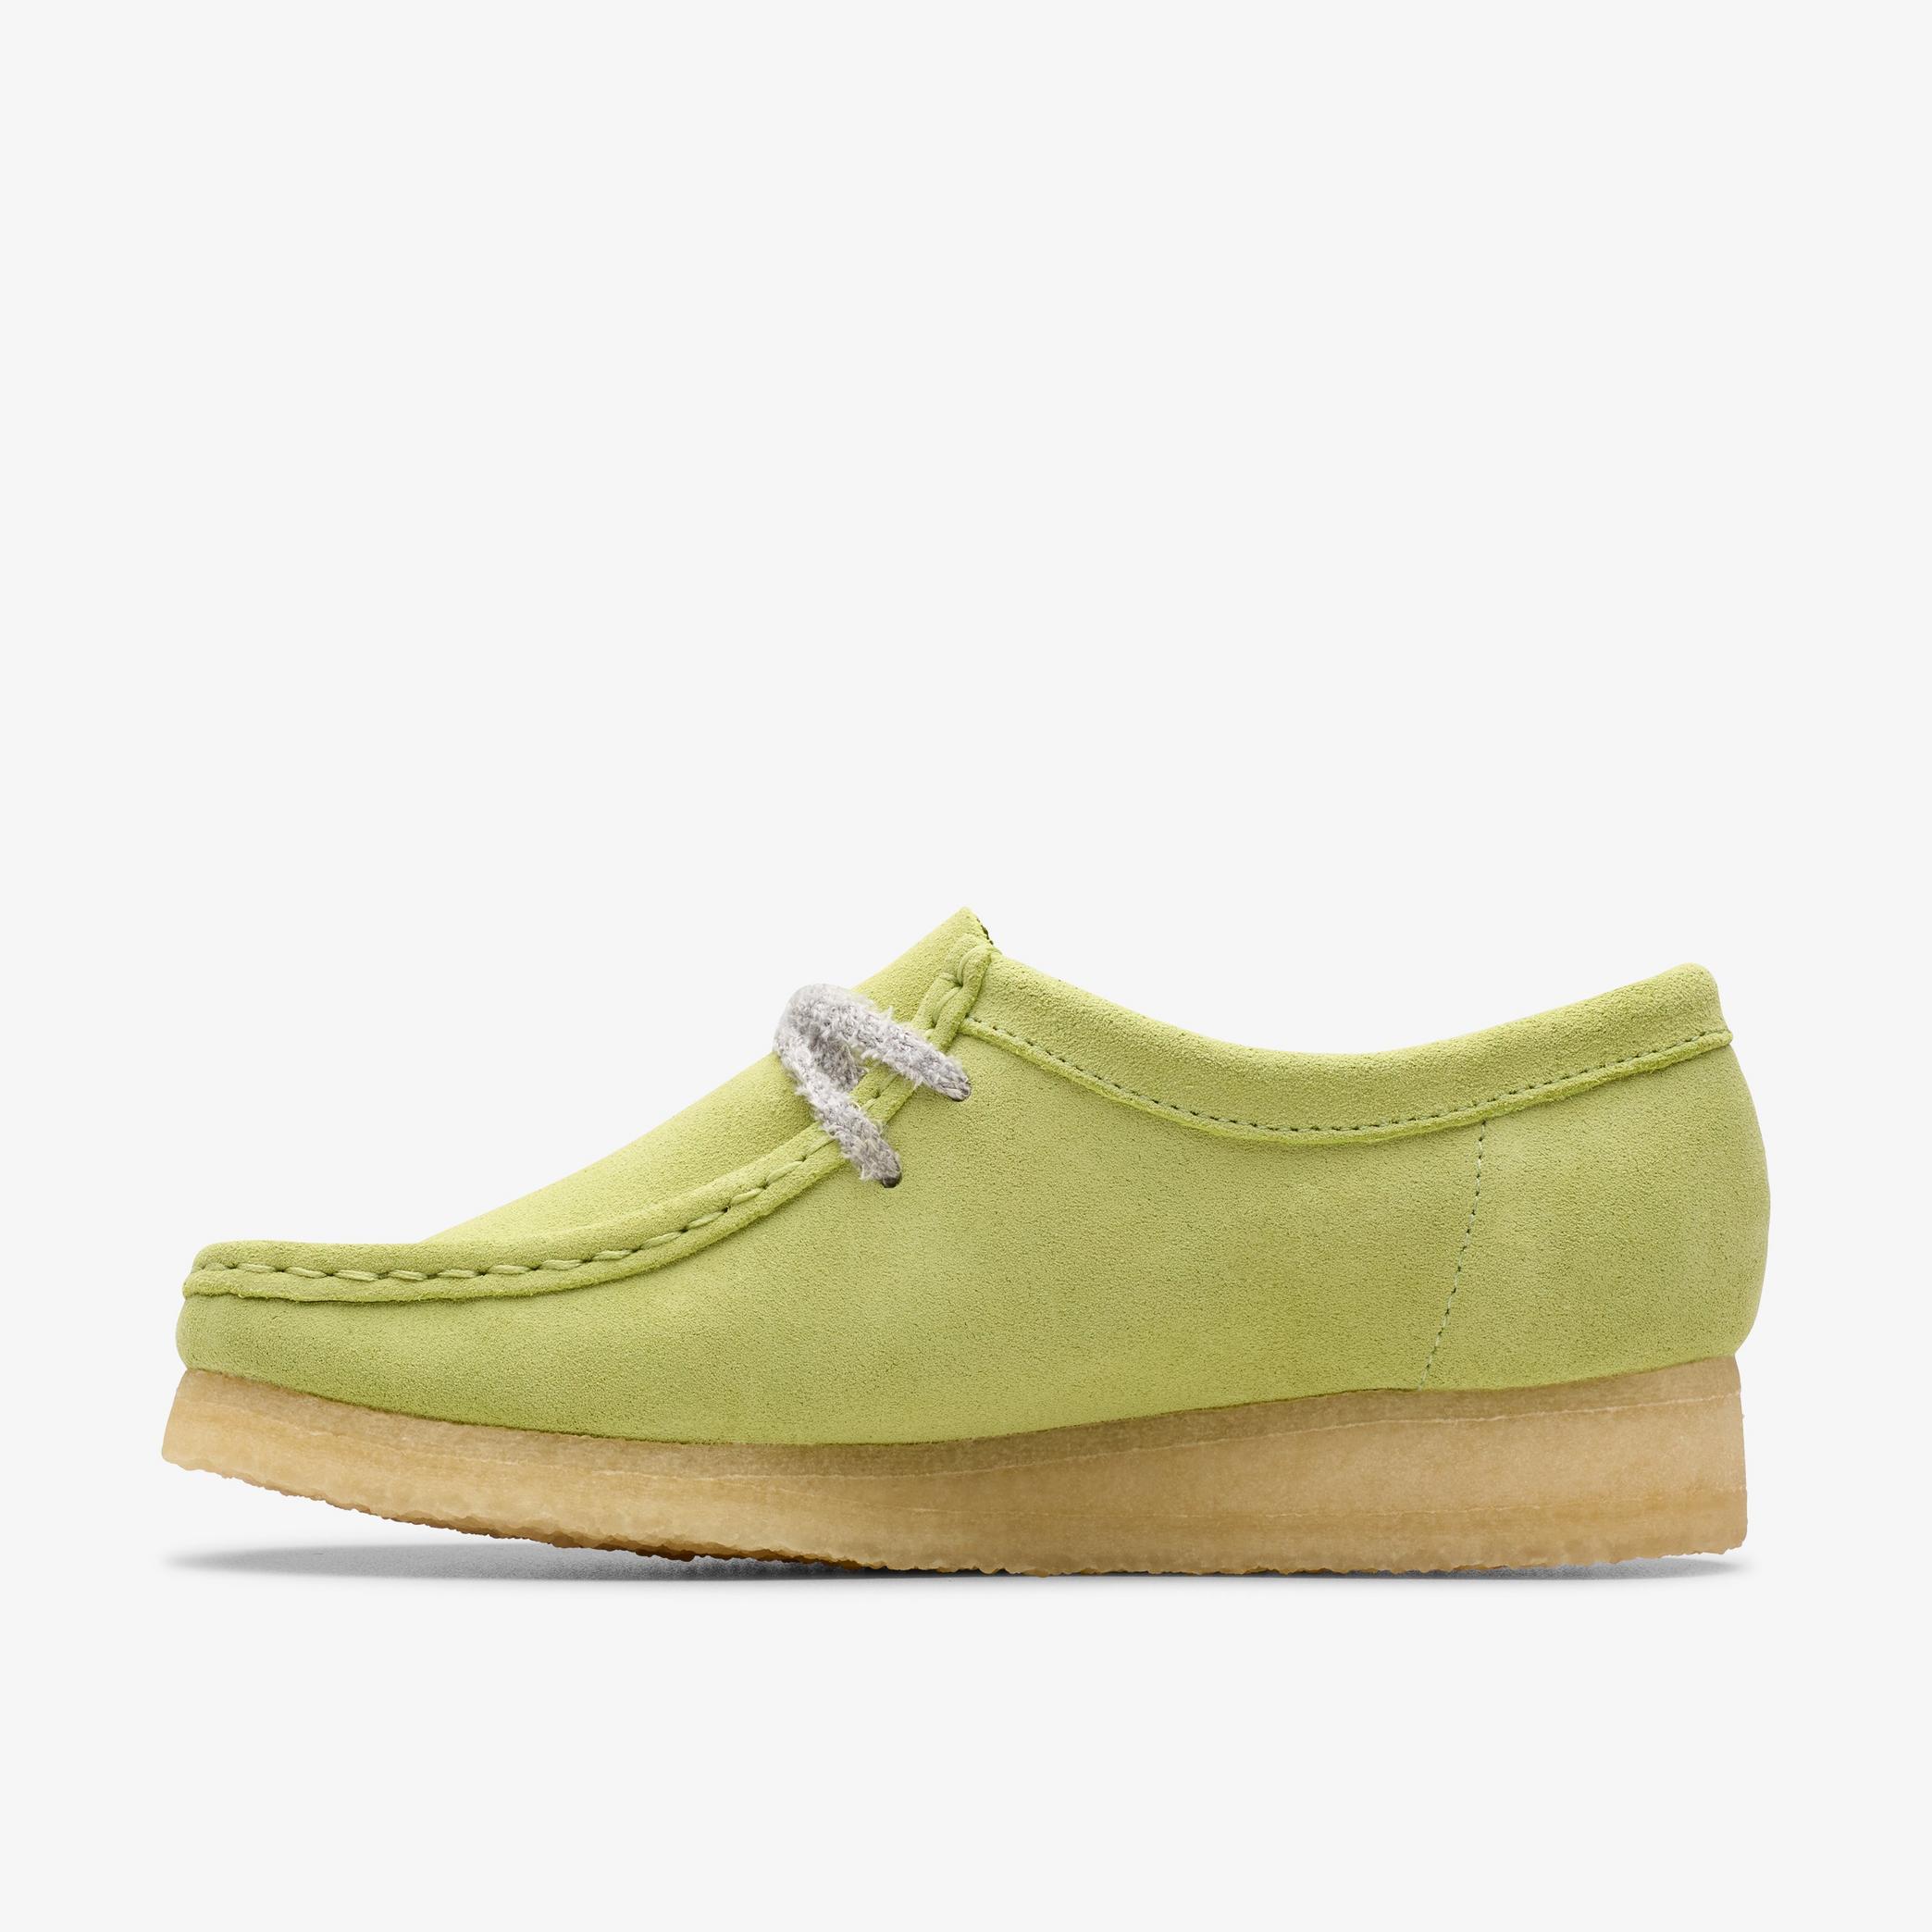 Wallabee Pale Lime Suede Wallabee, view 2 of 7